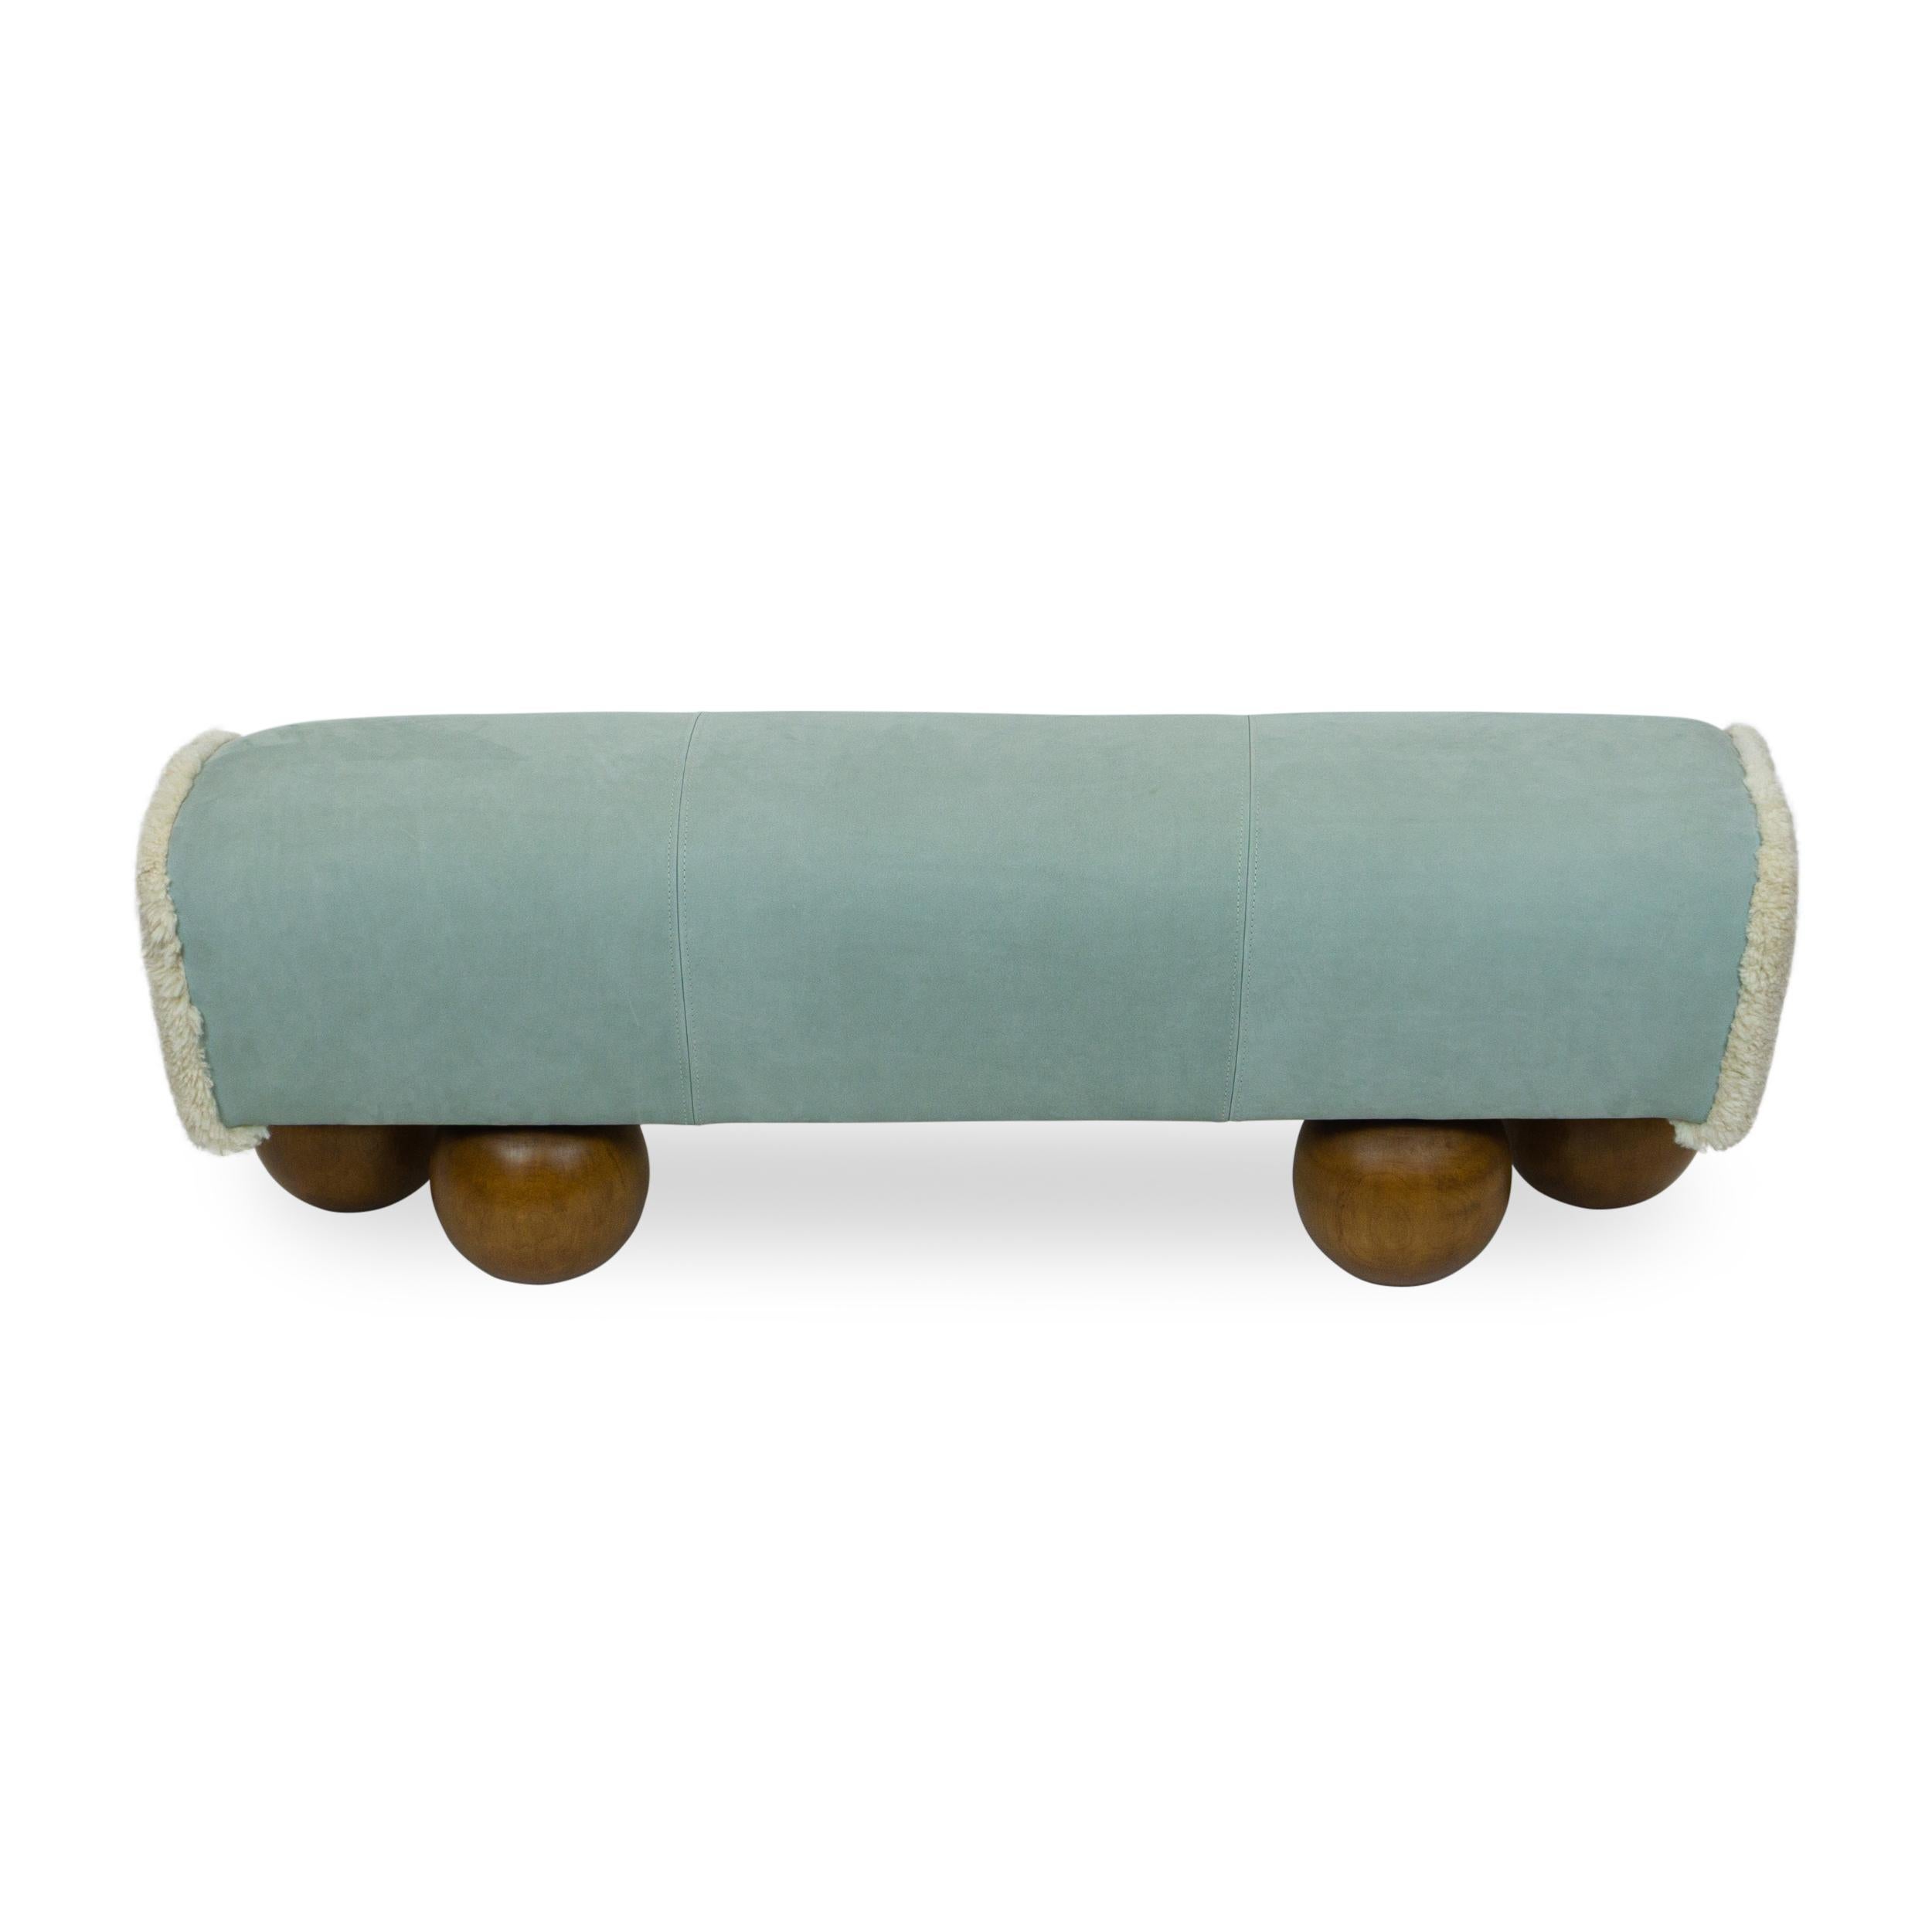 Modern Walnut Ball Foot Bench with Leather Saddle Shaped Seat, Customizable For Sale